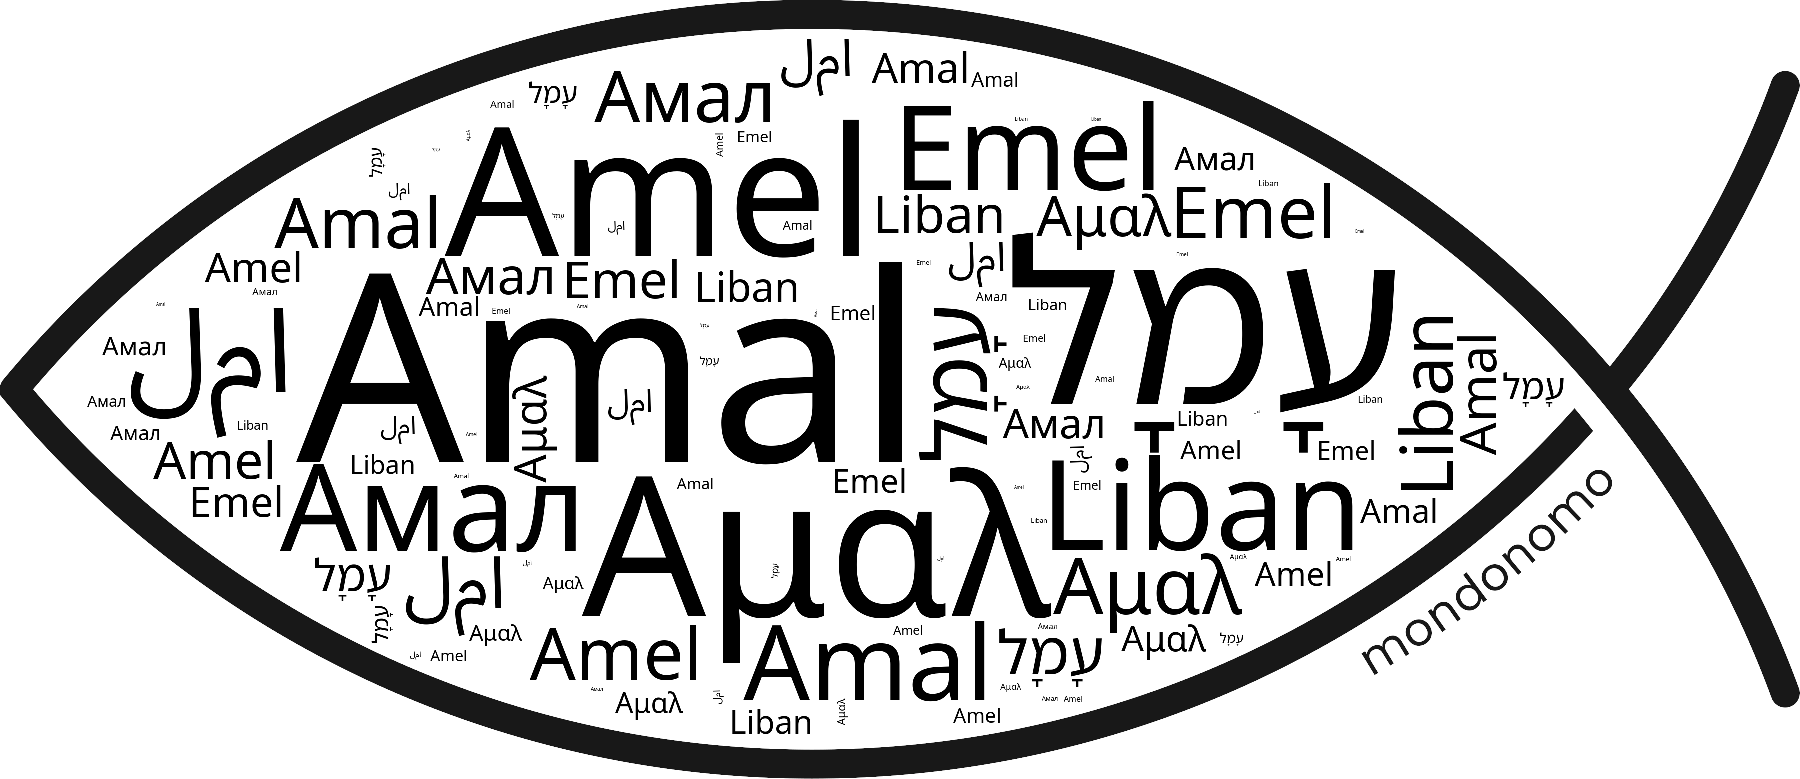 Name Amal in the world's Bibles